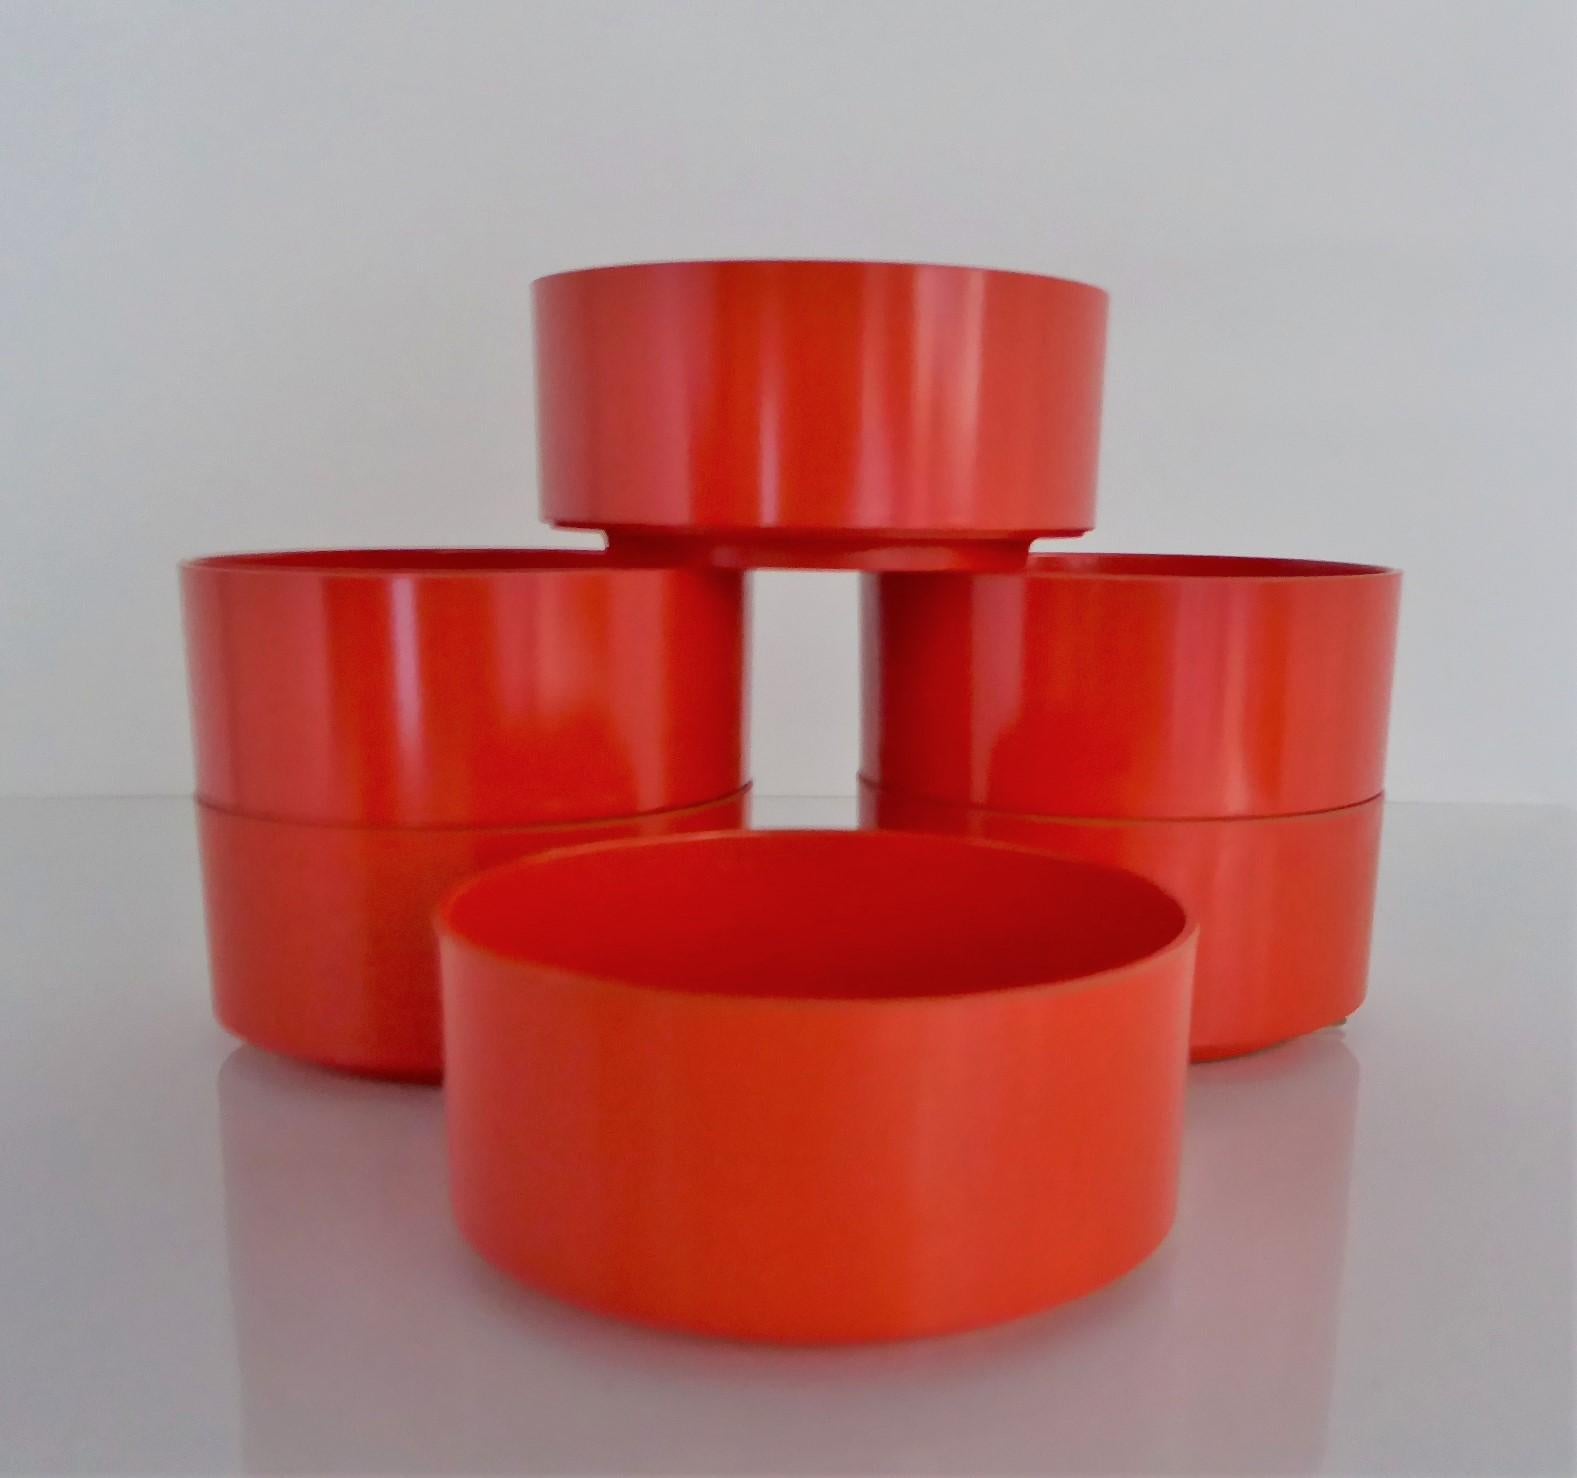 Plastic Massimo Vignelli for Heller Set of Max 2 ABS Dinnerware, Italy 1960s - 22 Pieces